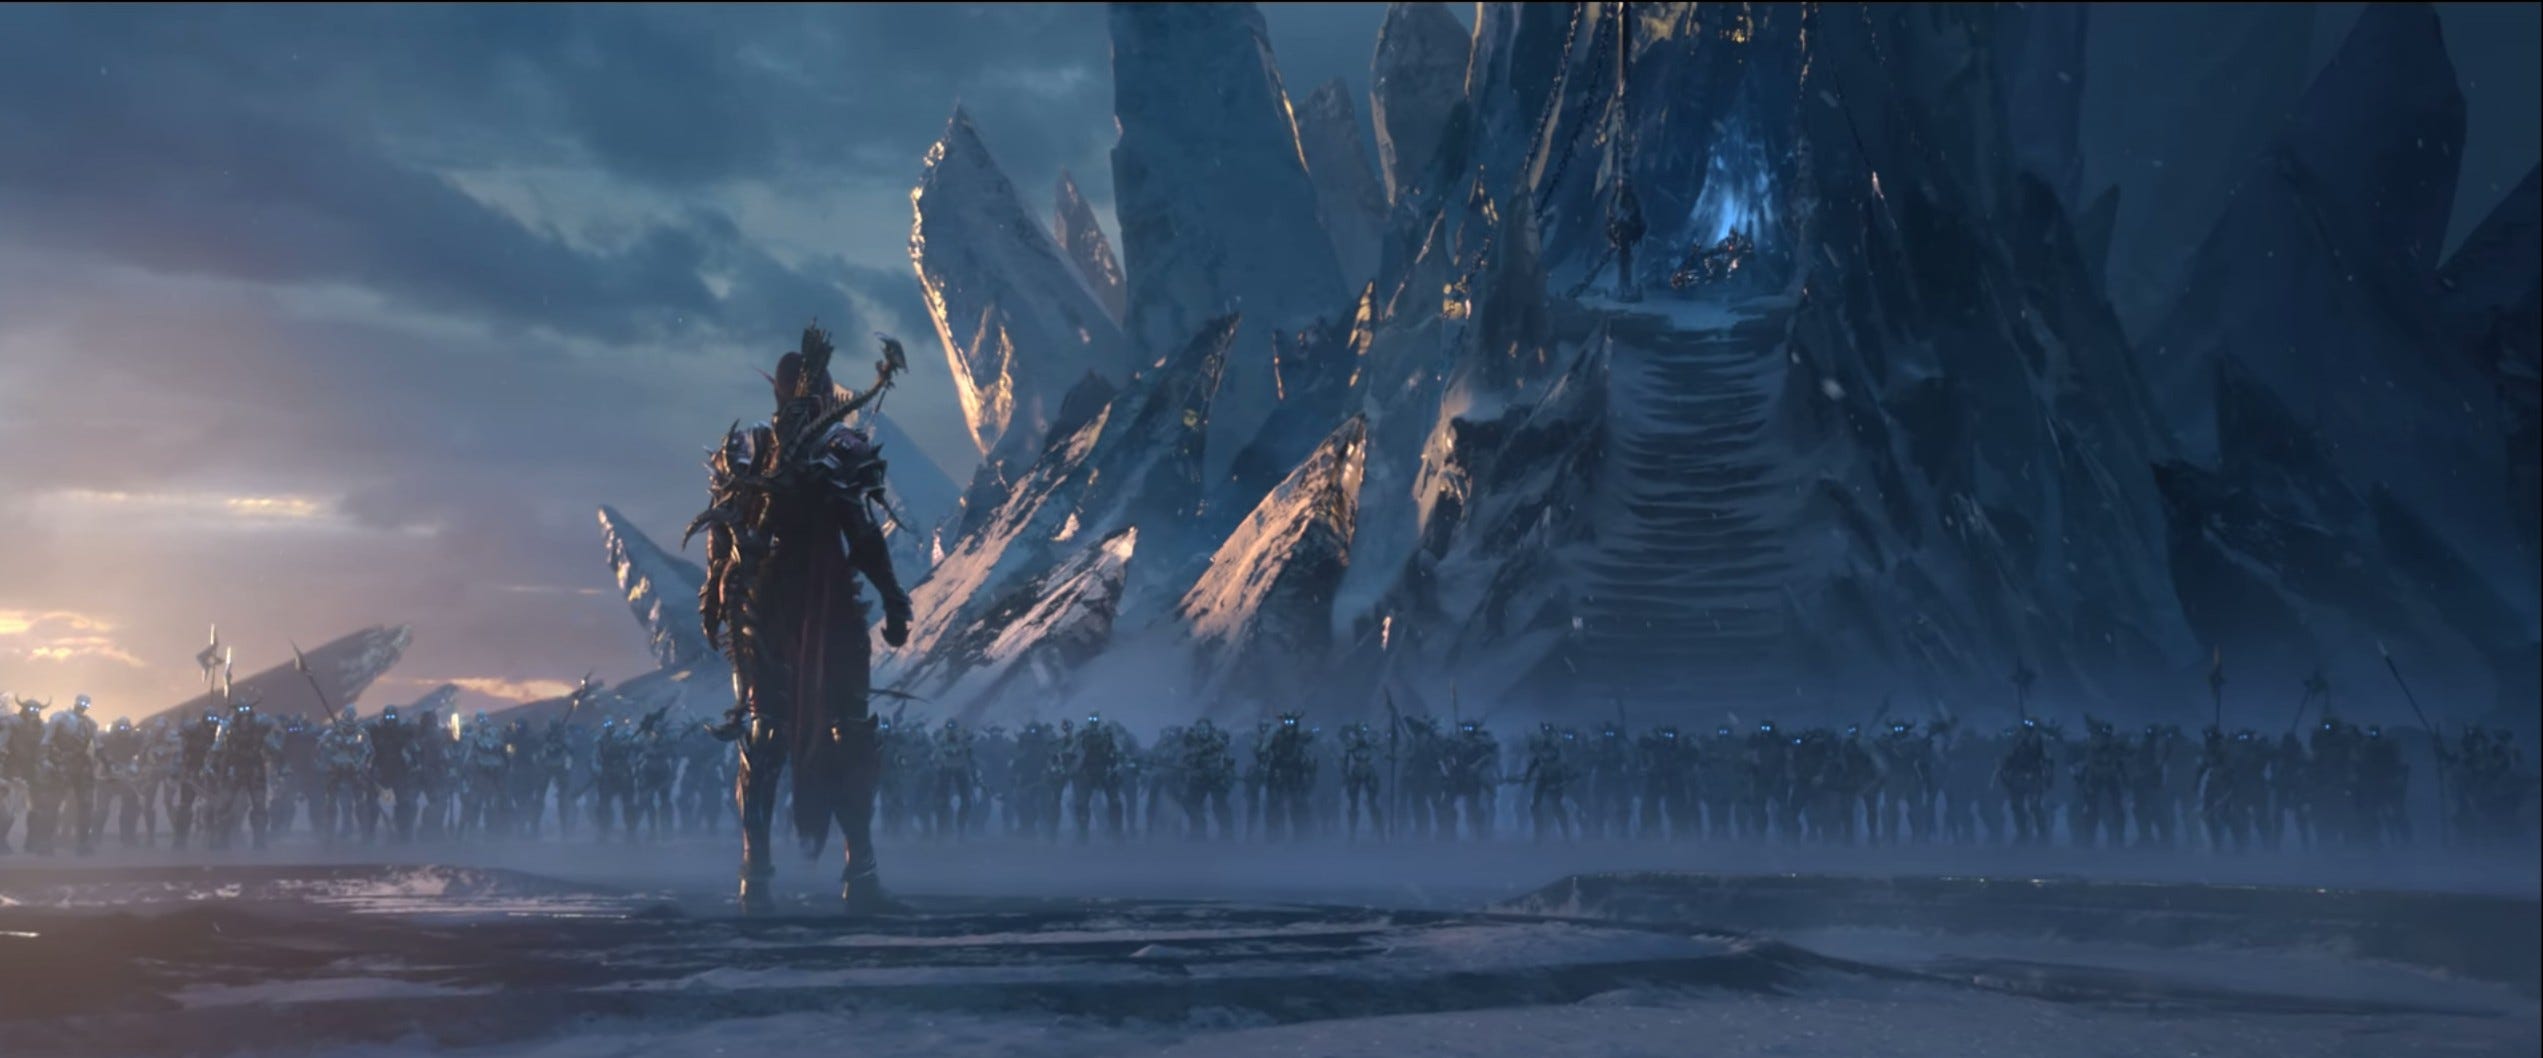 A photo of Sylvanas staring down the Lich King’s army in the opening for World of Warcraft: Shadowlands